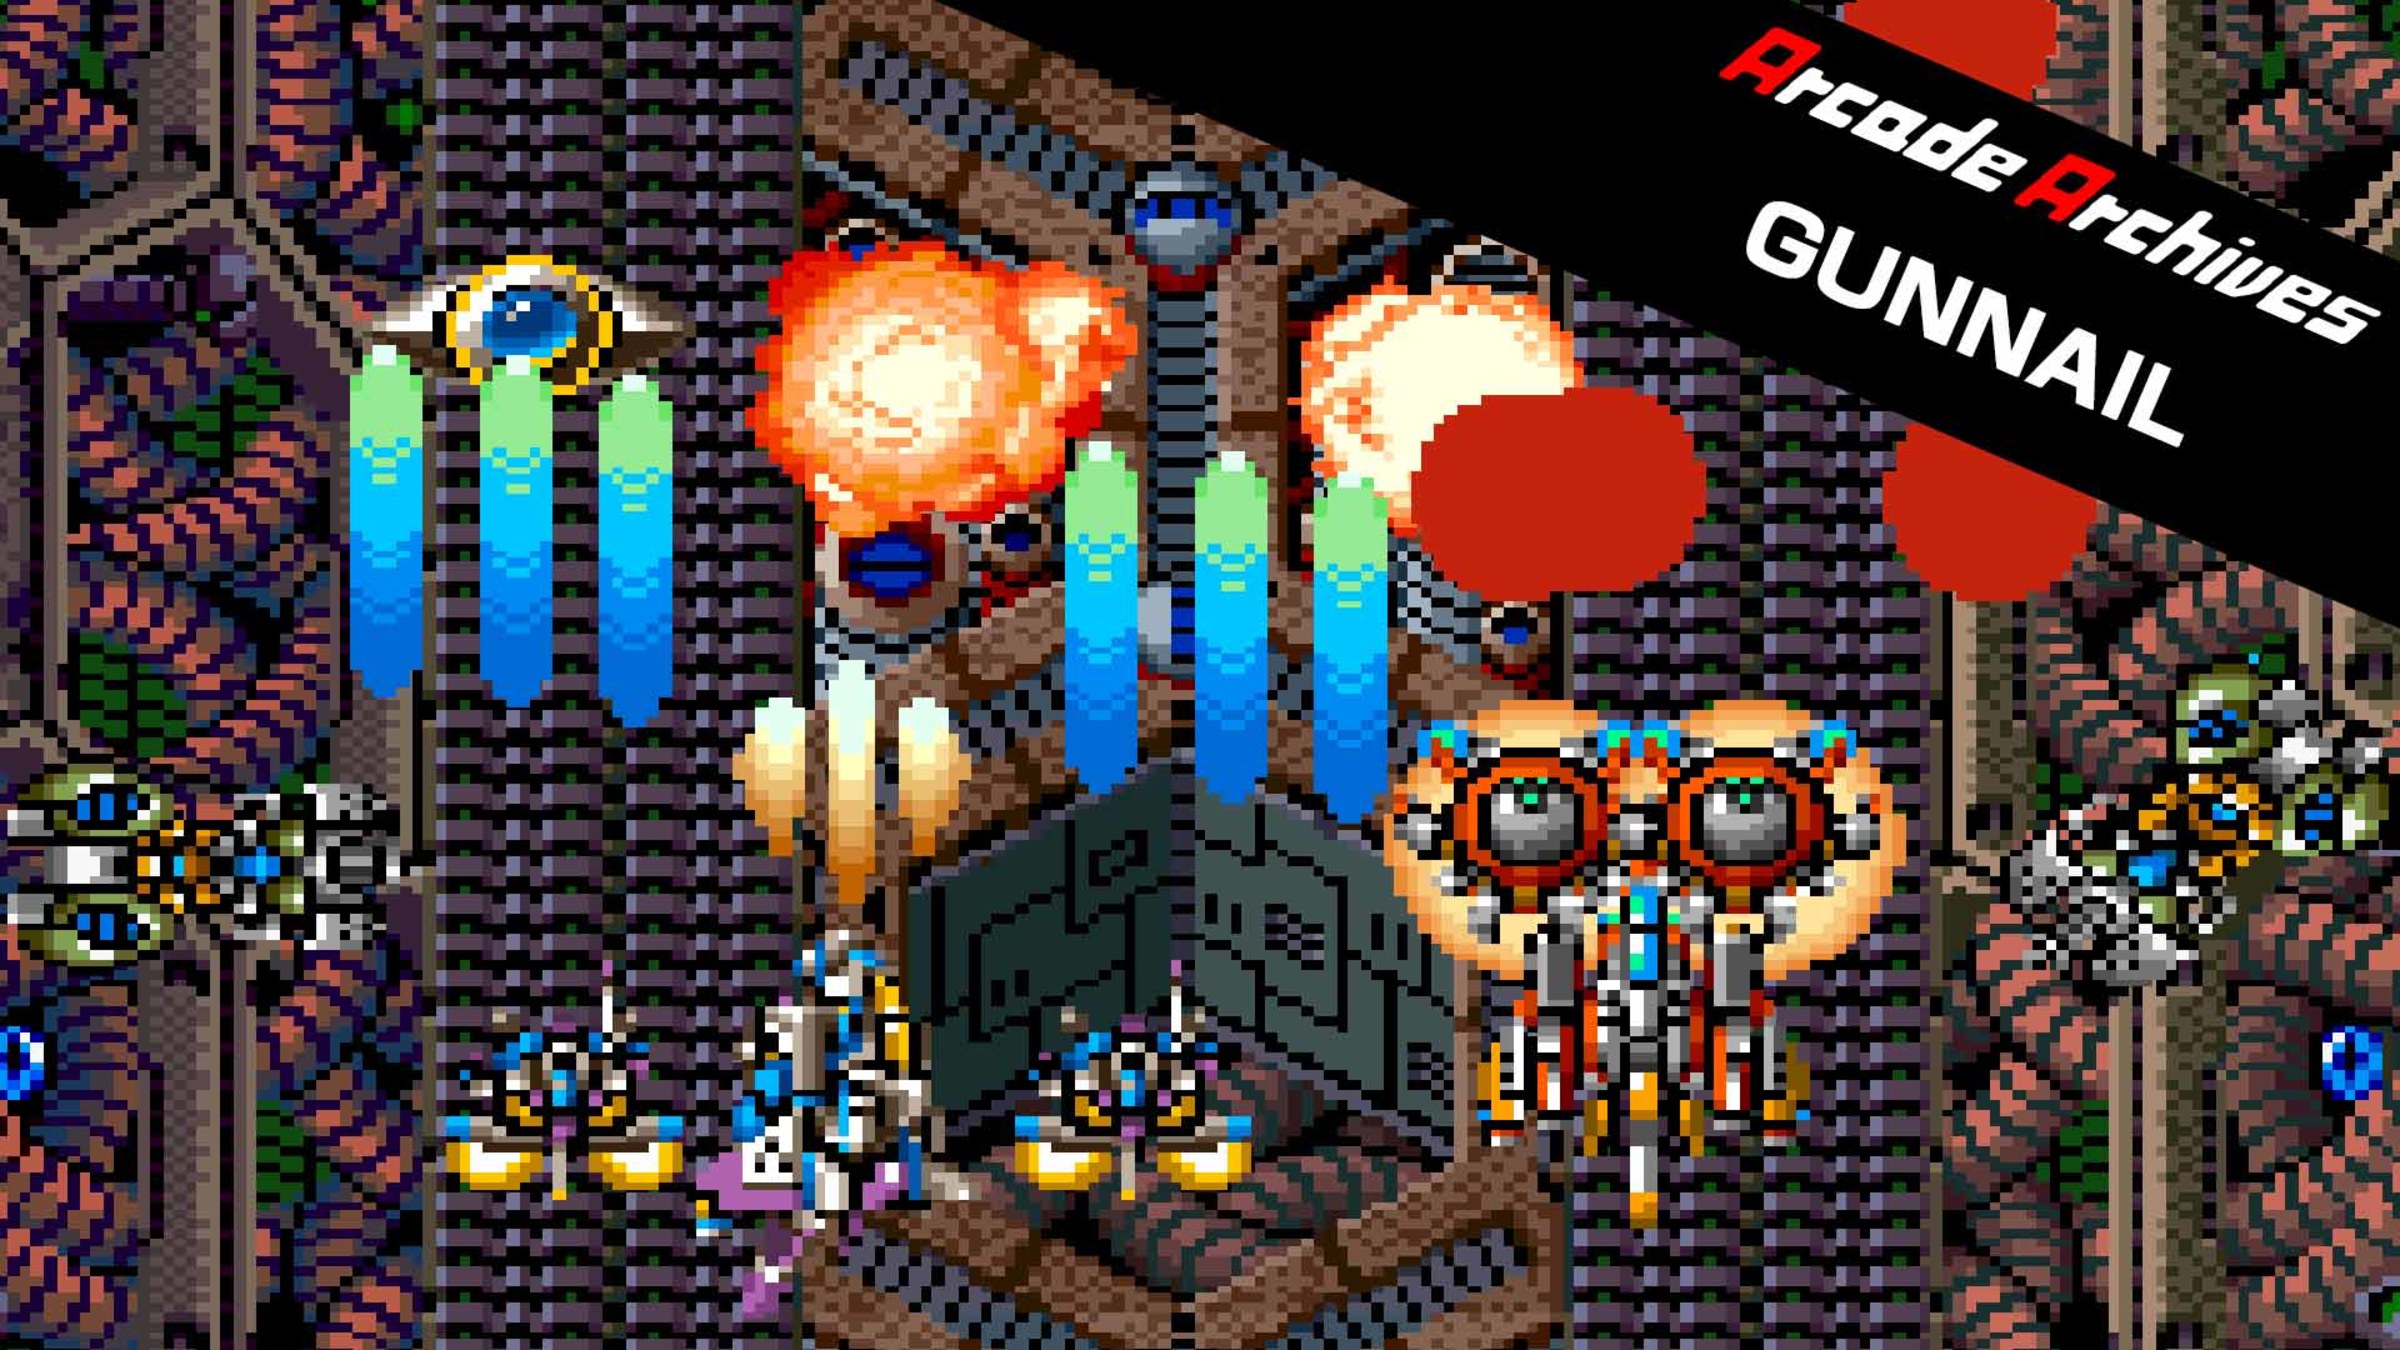 Arcade Archives GUNNAIL for Nintendo Switch